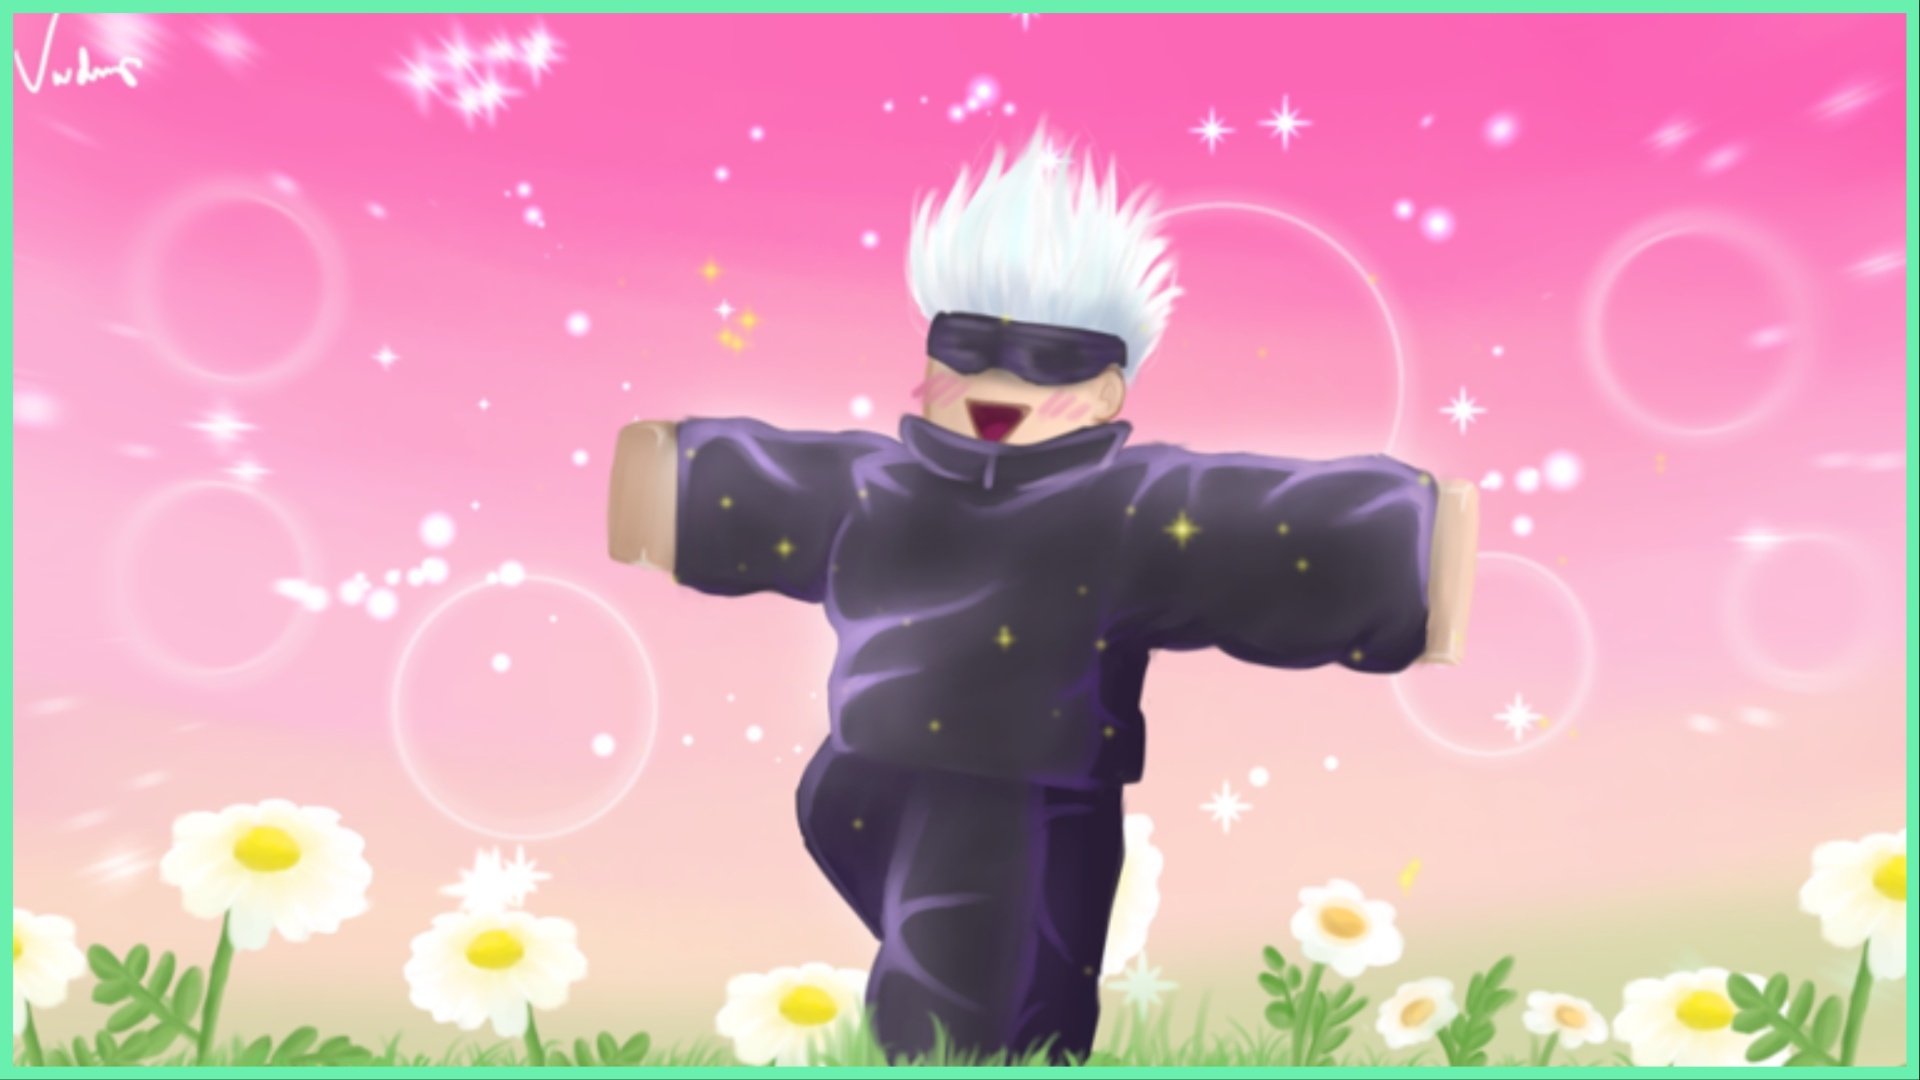 the image shows gojo in a hand-drawn roblox style doing his iconic run with both arms out to each side and a big smile on his face. The background is a gradient of pinks and sparkles with white flowers in grass around his feet